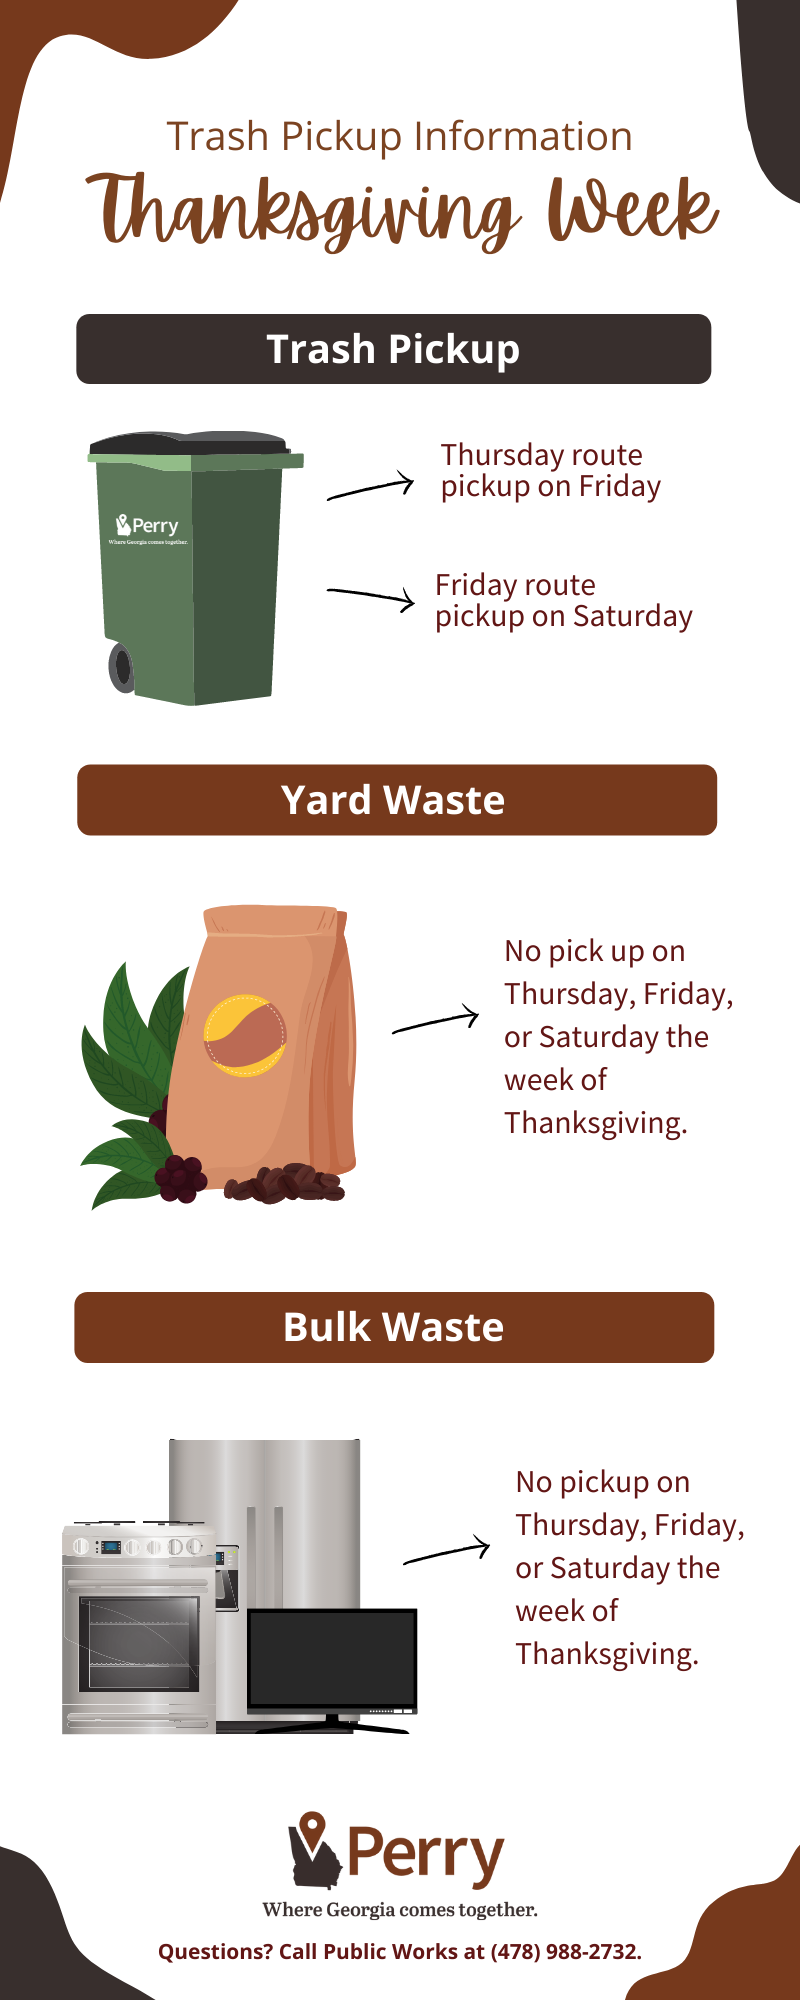 Thanksgiving Week Trash Pickup Information City of Perry